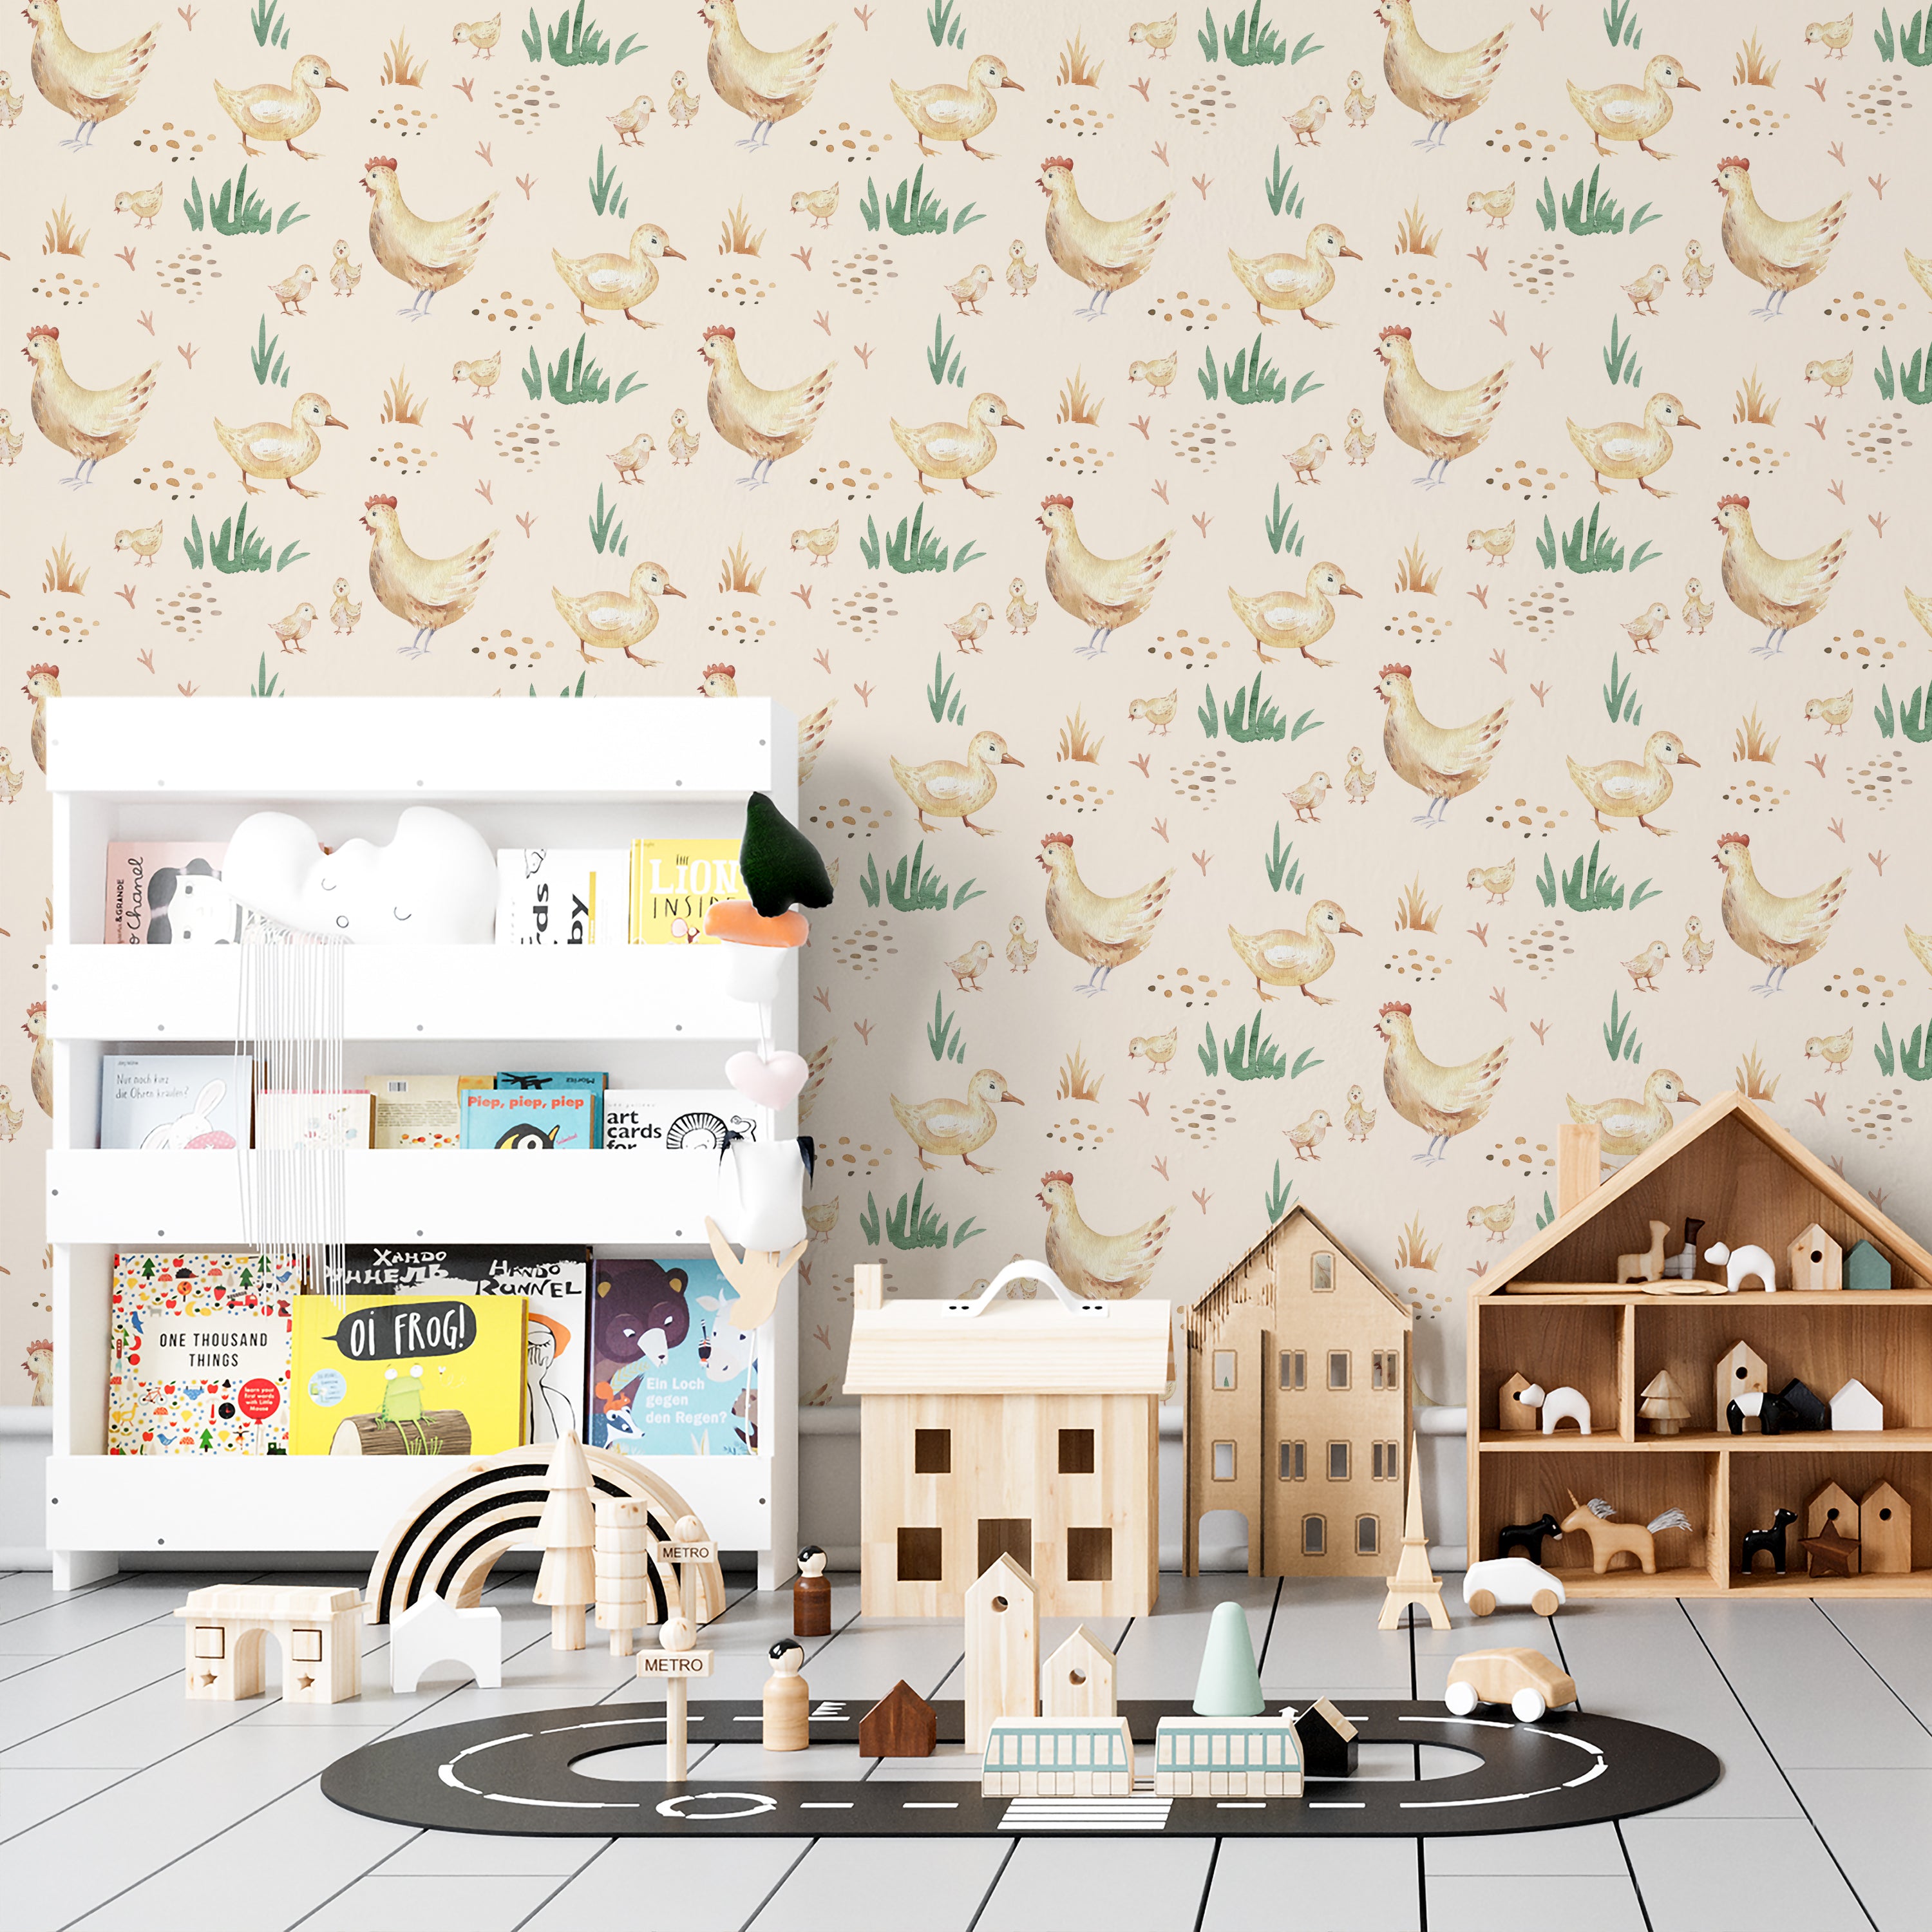 A child's playroom featuring walls adorned with a watercolor wallpaper that displays a pattern of chickens, chicks, ducks, and ducklings in a pastoral scene. The room includes wooden toys and a house-shaped shelf filled with various playful items.